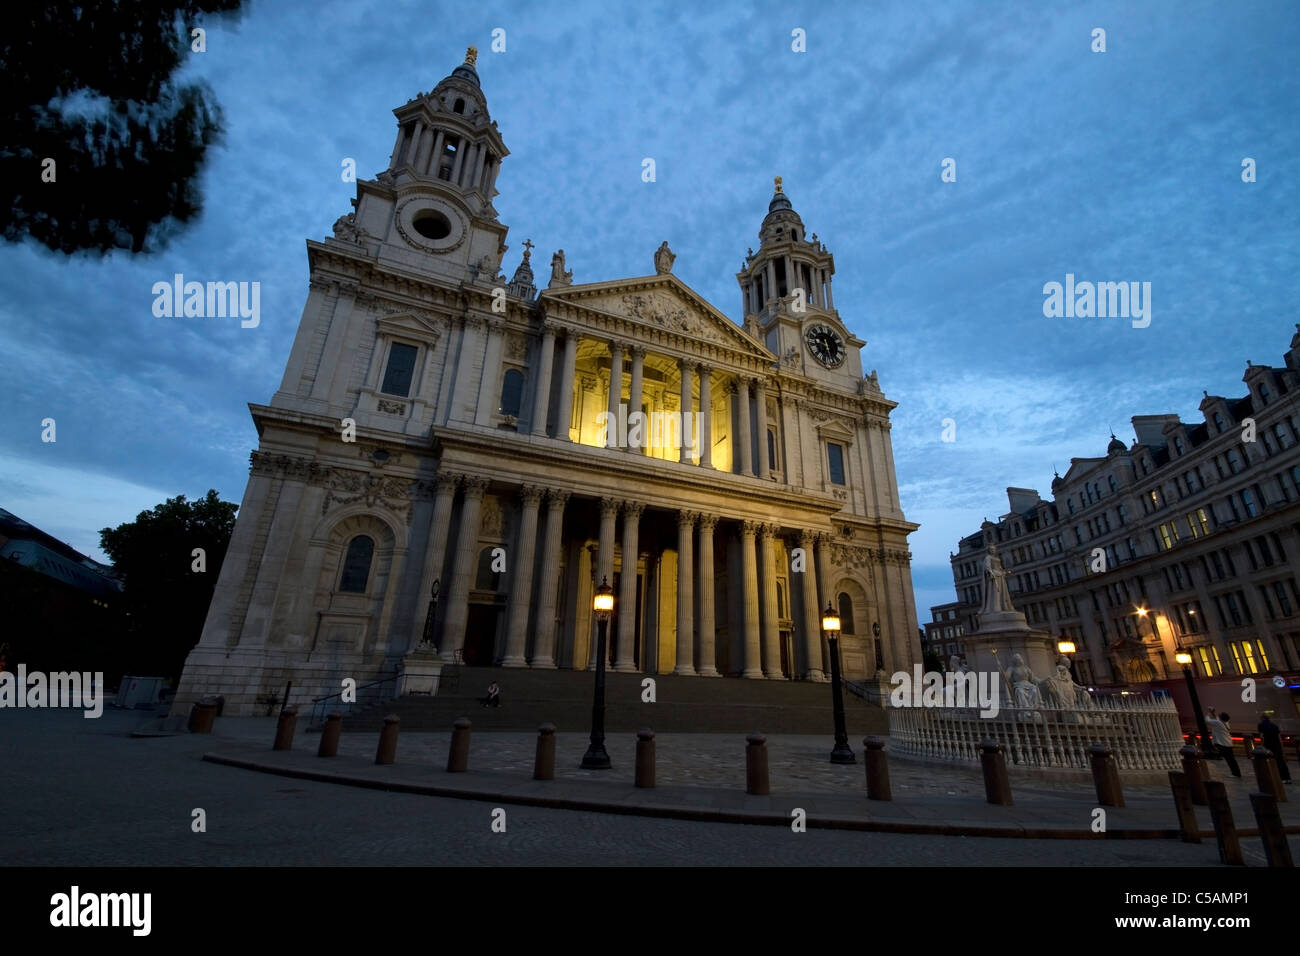 The facade of St Paul's Cathedral in the City of London at twilight, England Stock Photo